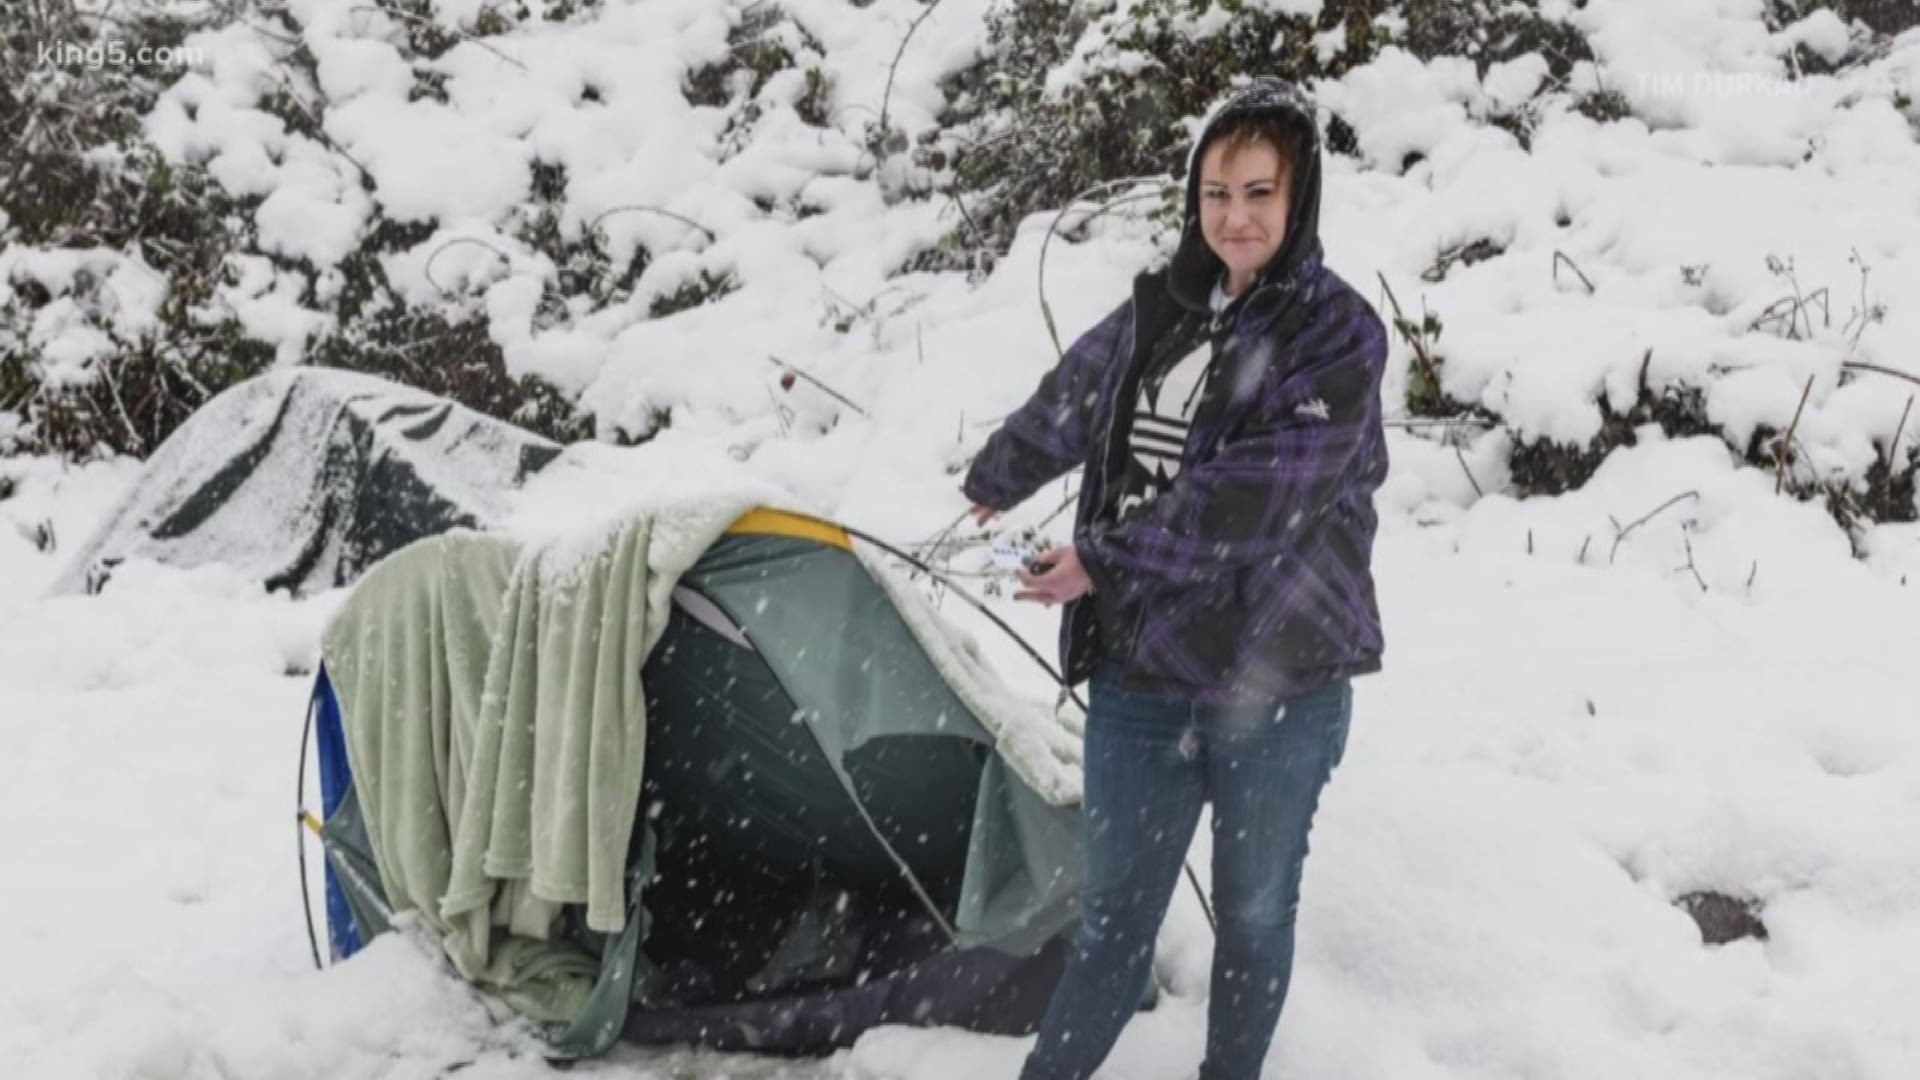 Seattle photographer Tim Durkan talks about homeless outreach during the recent winter storms